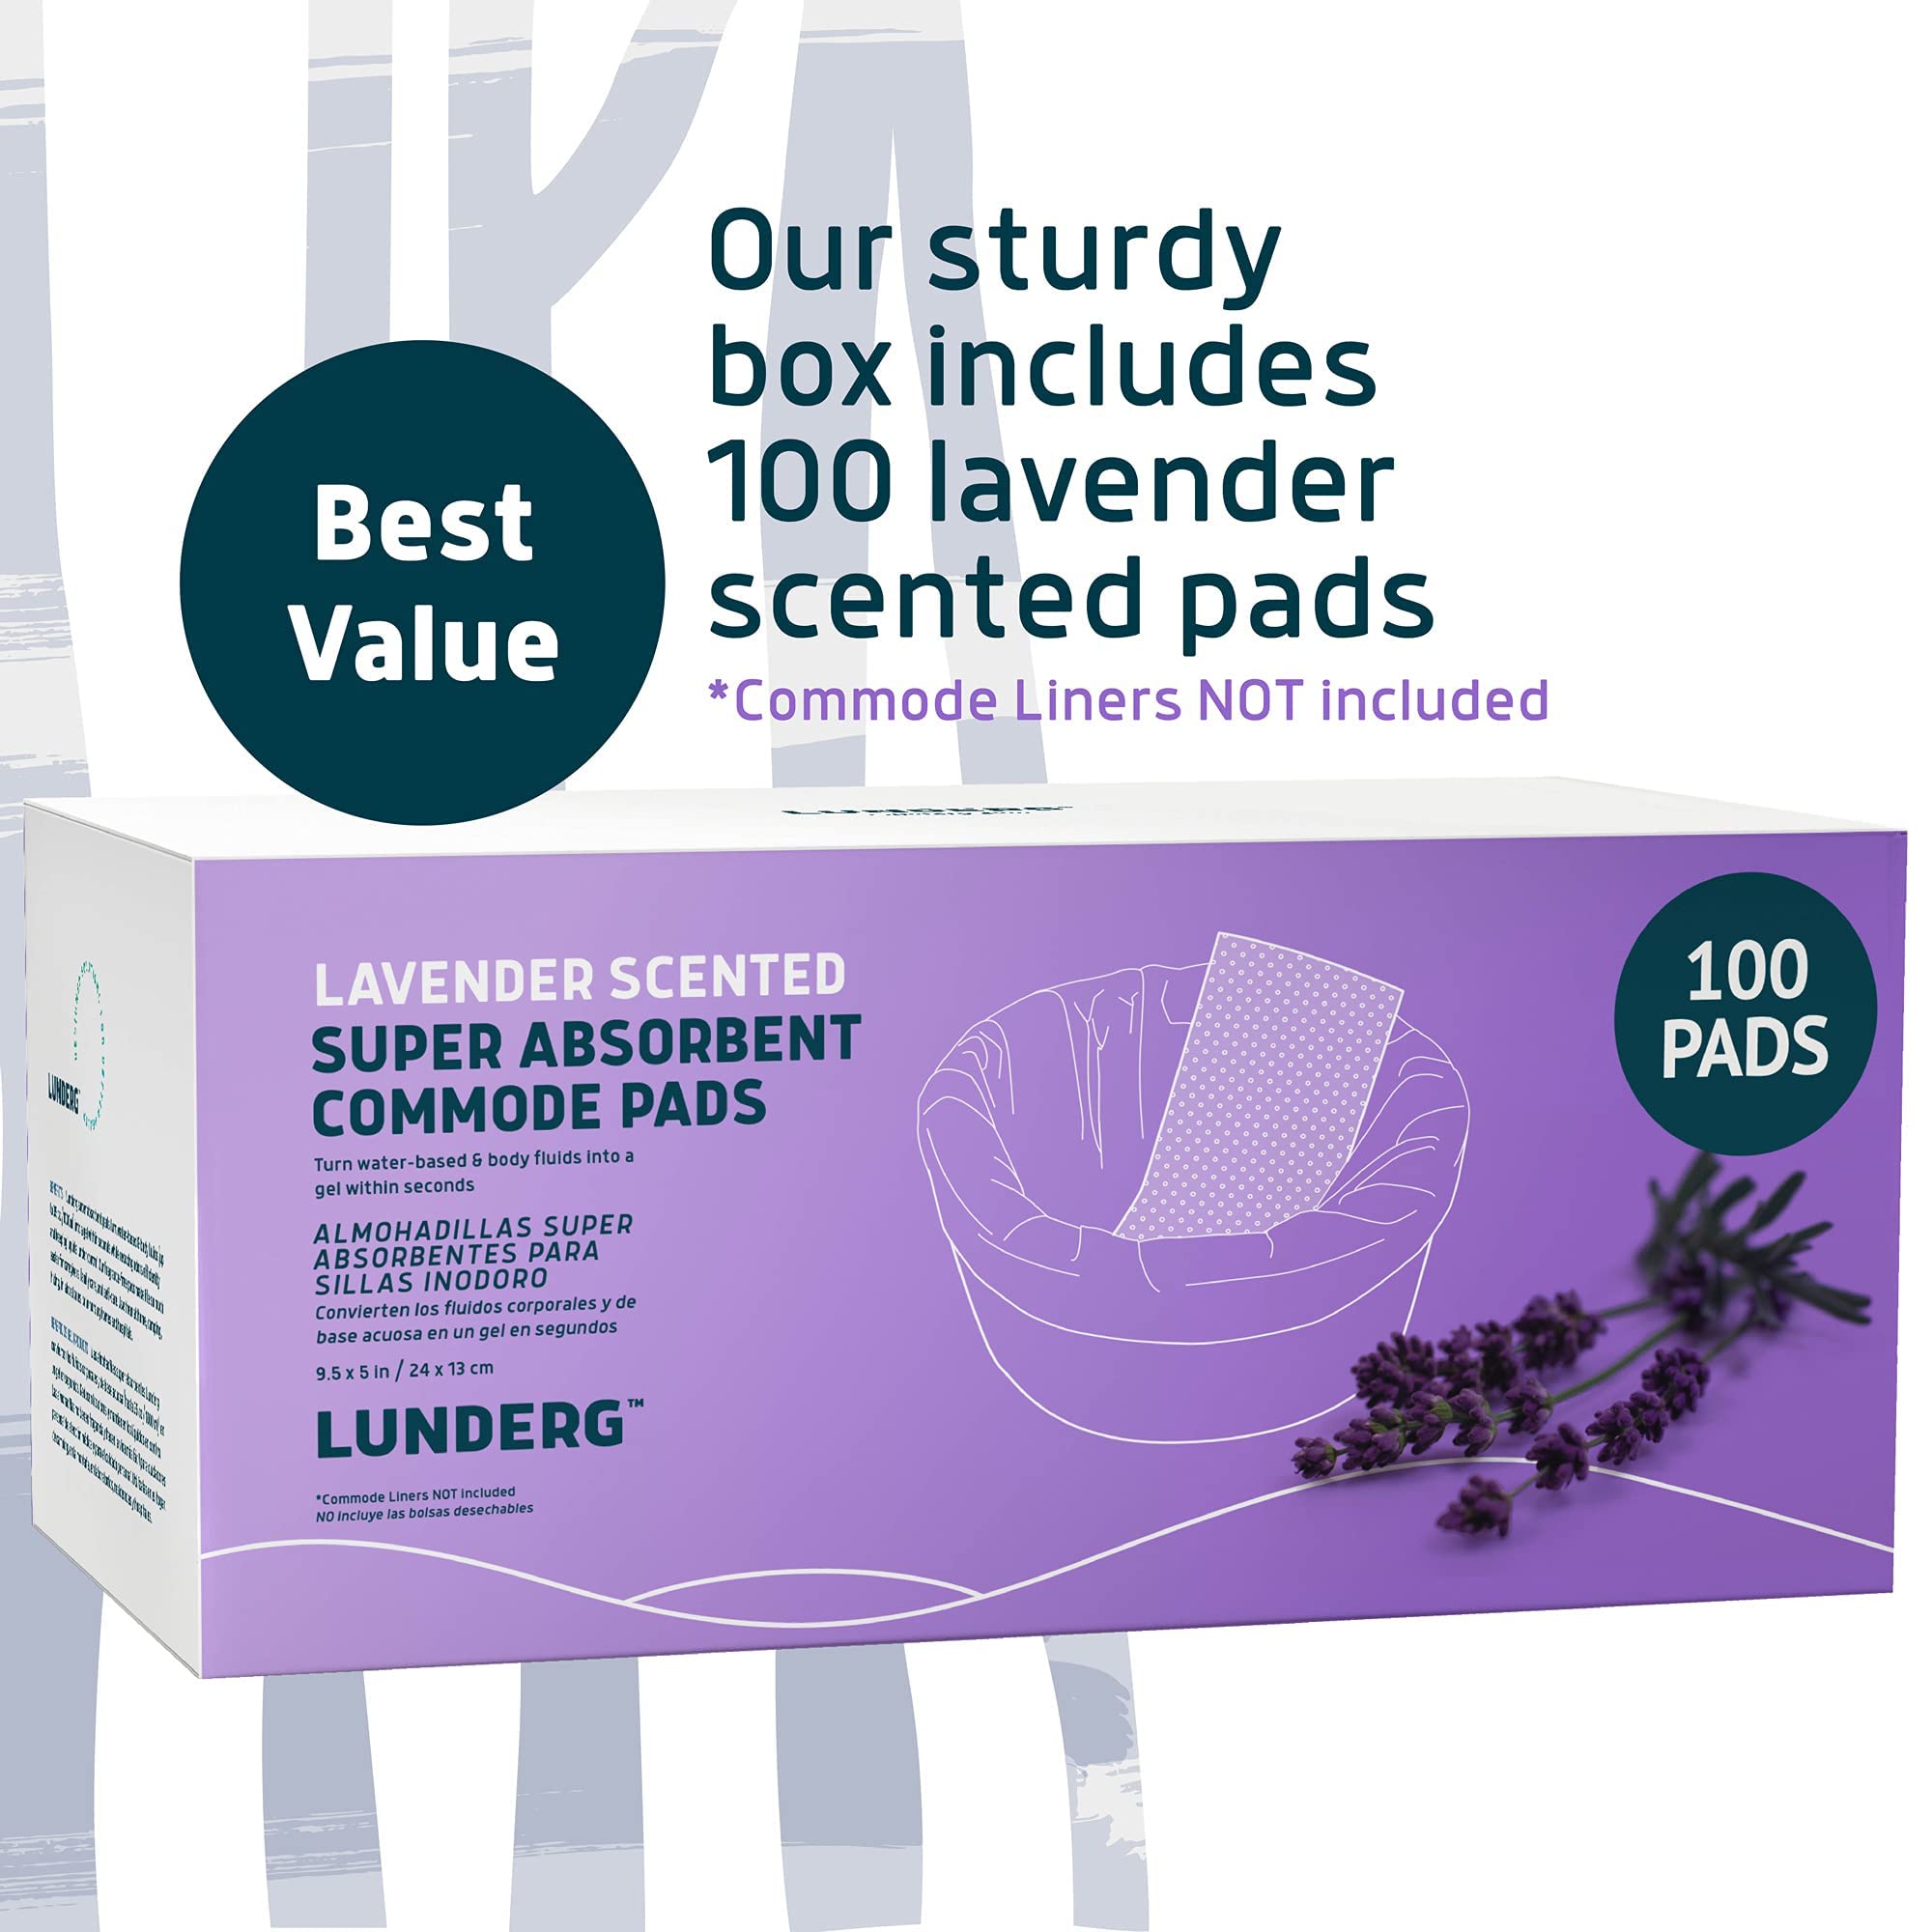 Lunderg Lavender Scented Super Absorbent Commode Pads - Medical Grade Value Pack 100 Count - for Bedside Commode Liners Disposable, Adult Commode Chair, Portable Toilet Bags - Light Scent